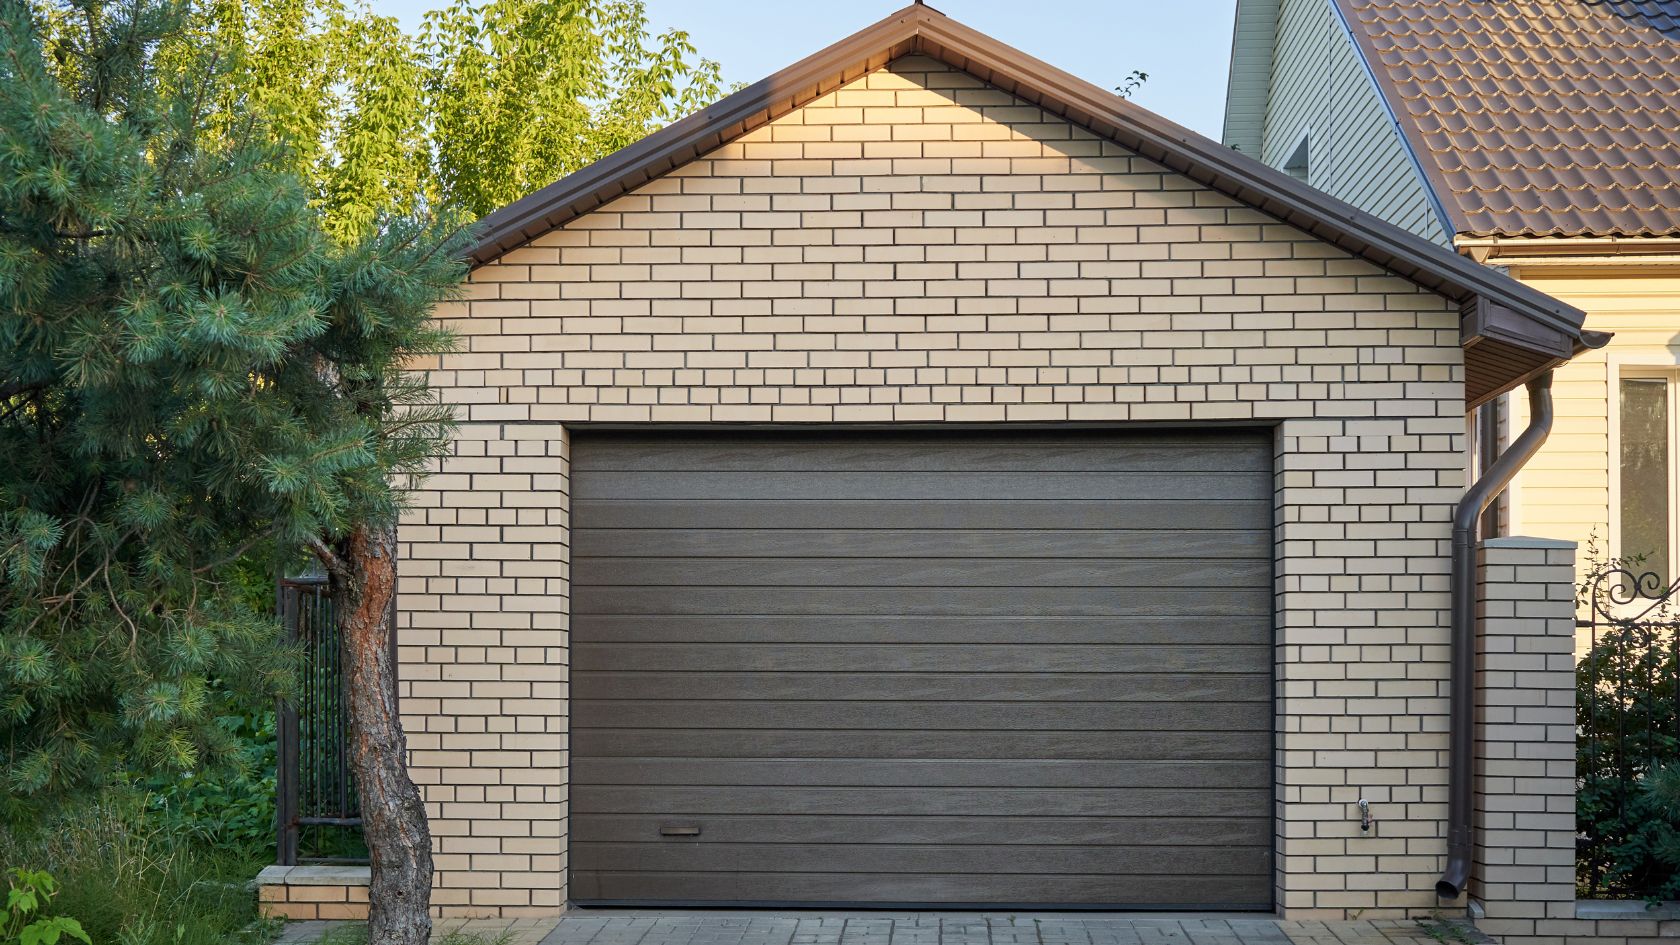 A brick house with a large garage door